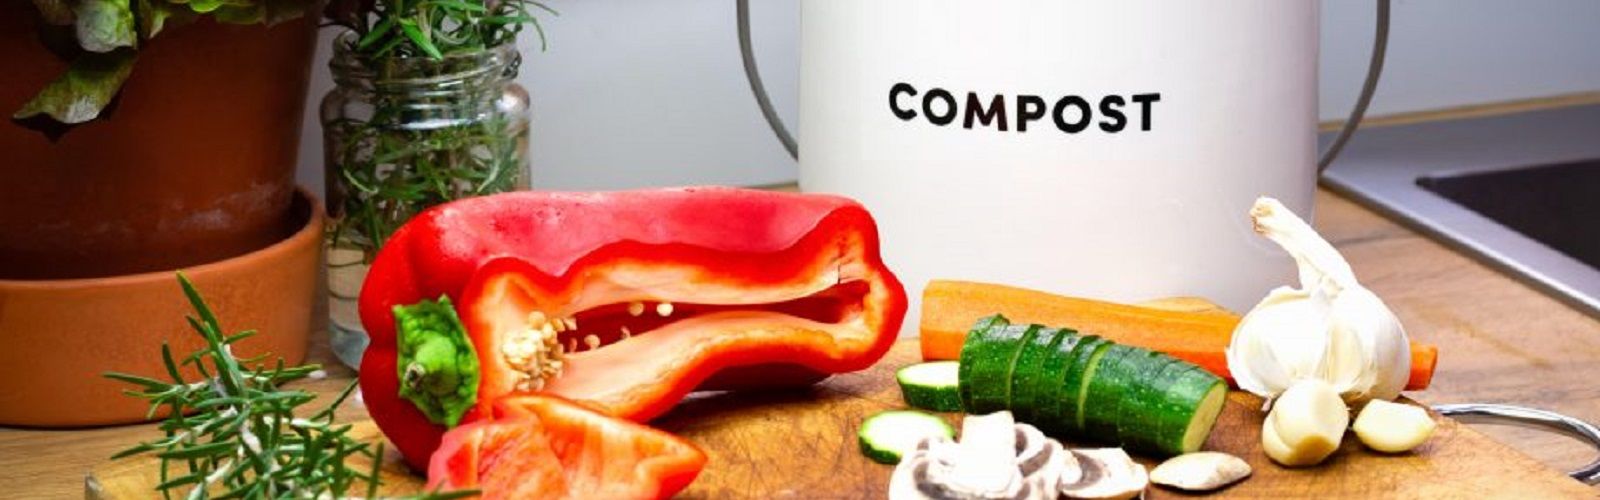 Worm and compost banner banner image